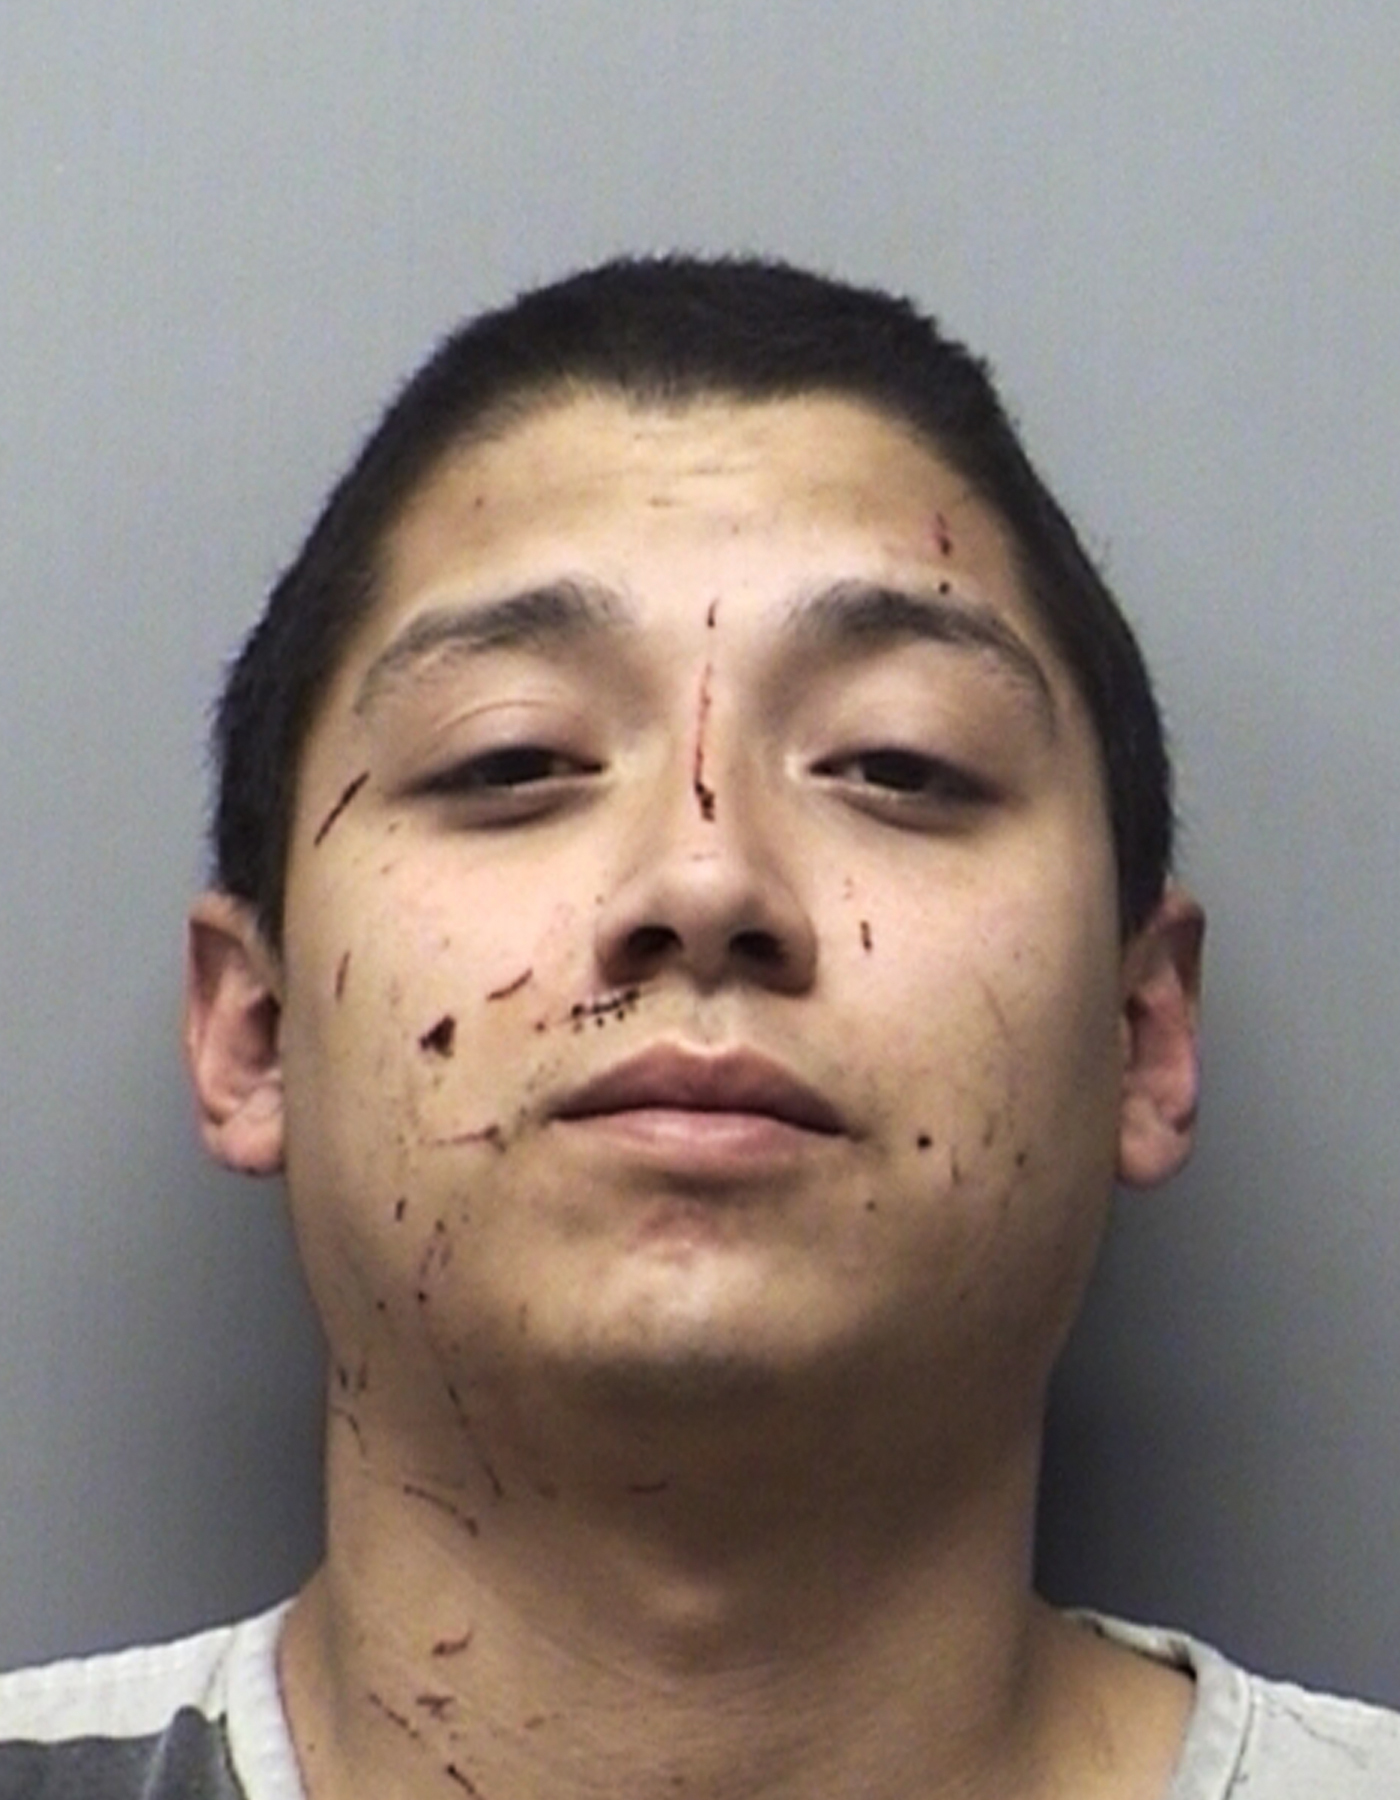 This undated photo provided by the From Wise County Sheriff’s Office shows Andrew Joseph Fabila. Deputies on Tuesday, Feb. 12, 2019, discovered two malnourished children crammed into a locked dog cage and two more smeared with feces and urine in a barn in North Texas, in what a sheriff described as the worst case of child abuse he has ever seen. Fabila and Paige Isabow Harkings, the mother of the four children, have been jailed without bond after the children were found at their rural home. (AP)